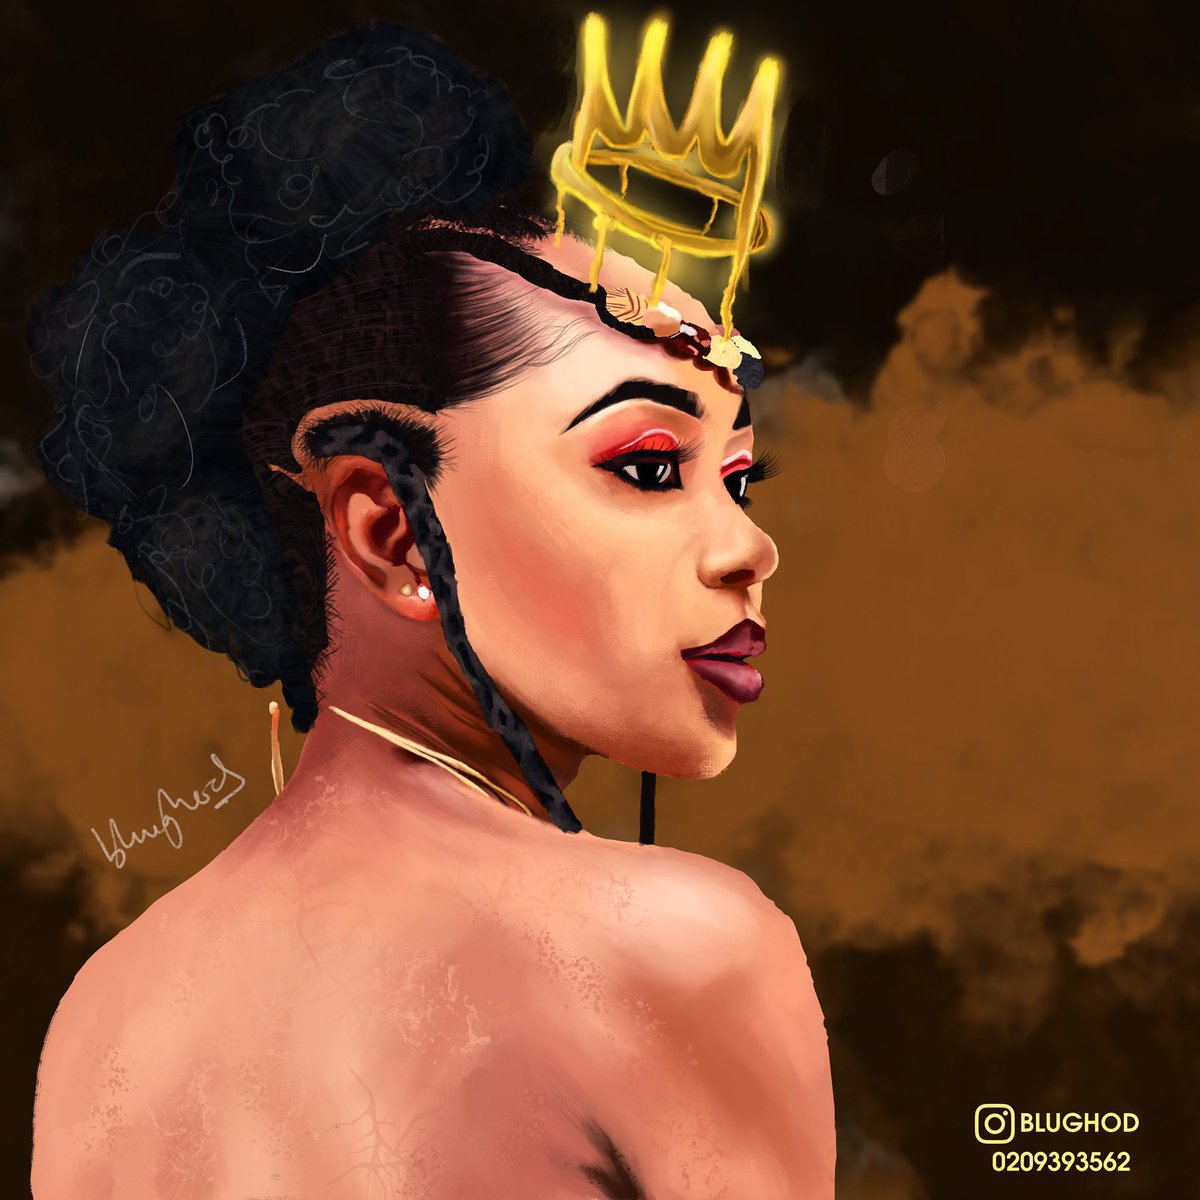 Something for the Queen 👸 @IamAkuapemPoloo 

Help retweet my Painting. My client might be on your timeline🥰
#art #ghana #africa #beautiful #worldwidedesigner #painting #digitalpainting #portrait #portraitdrawing #colours #fashion #fashiondesigners #art #artist #digitalart